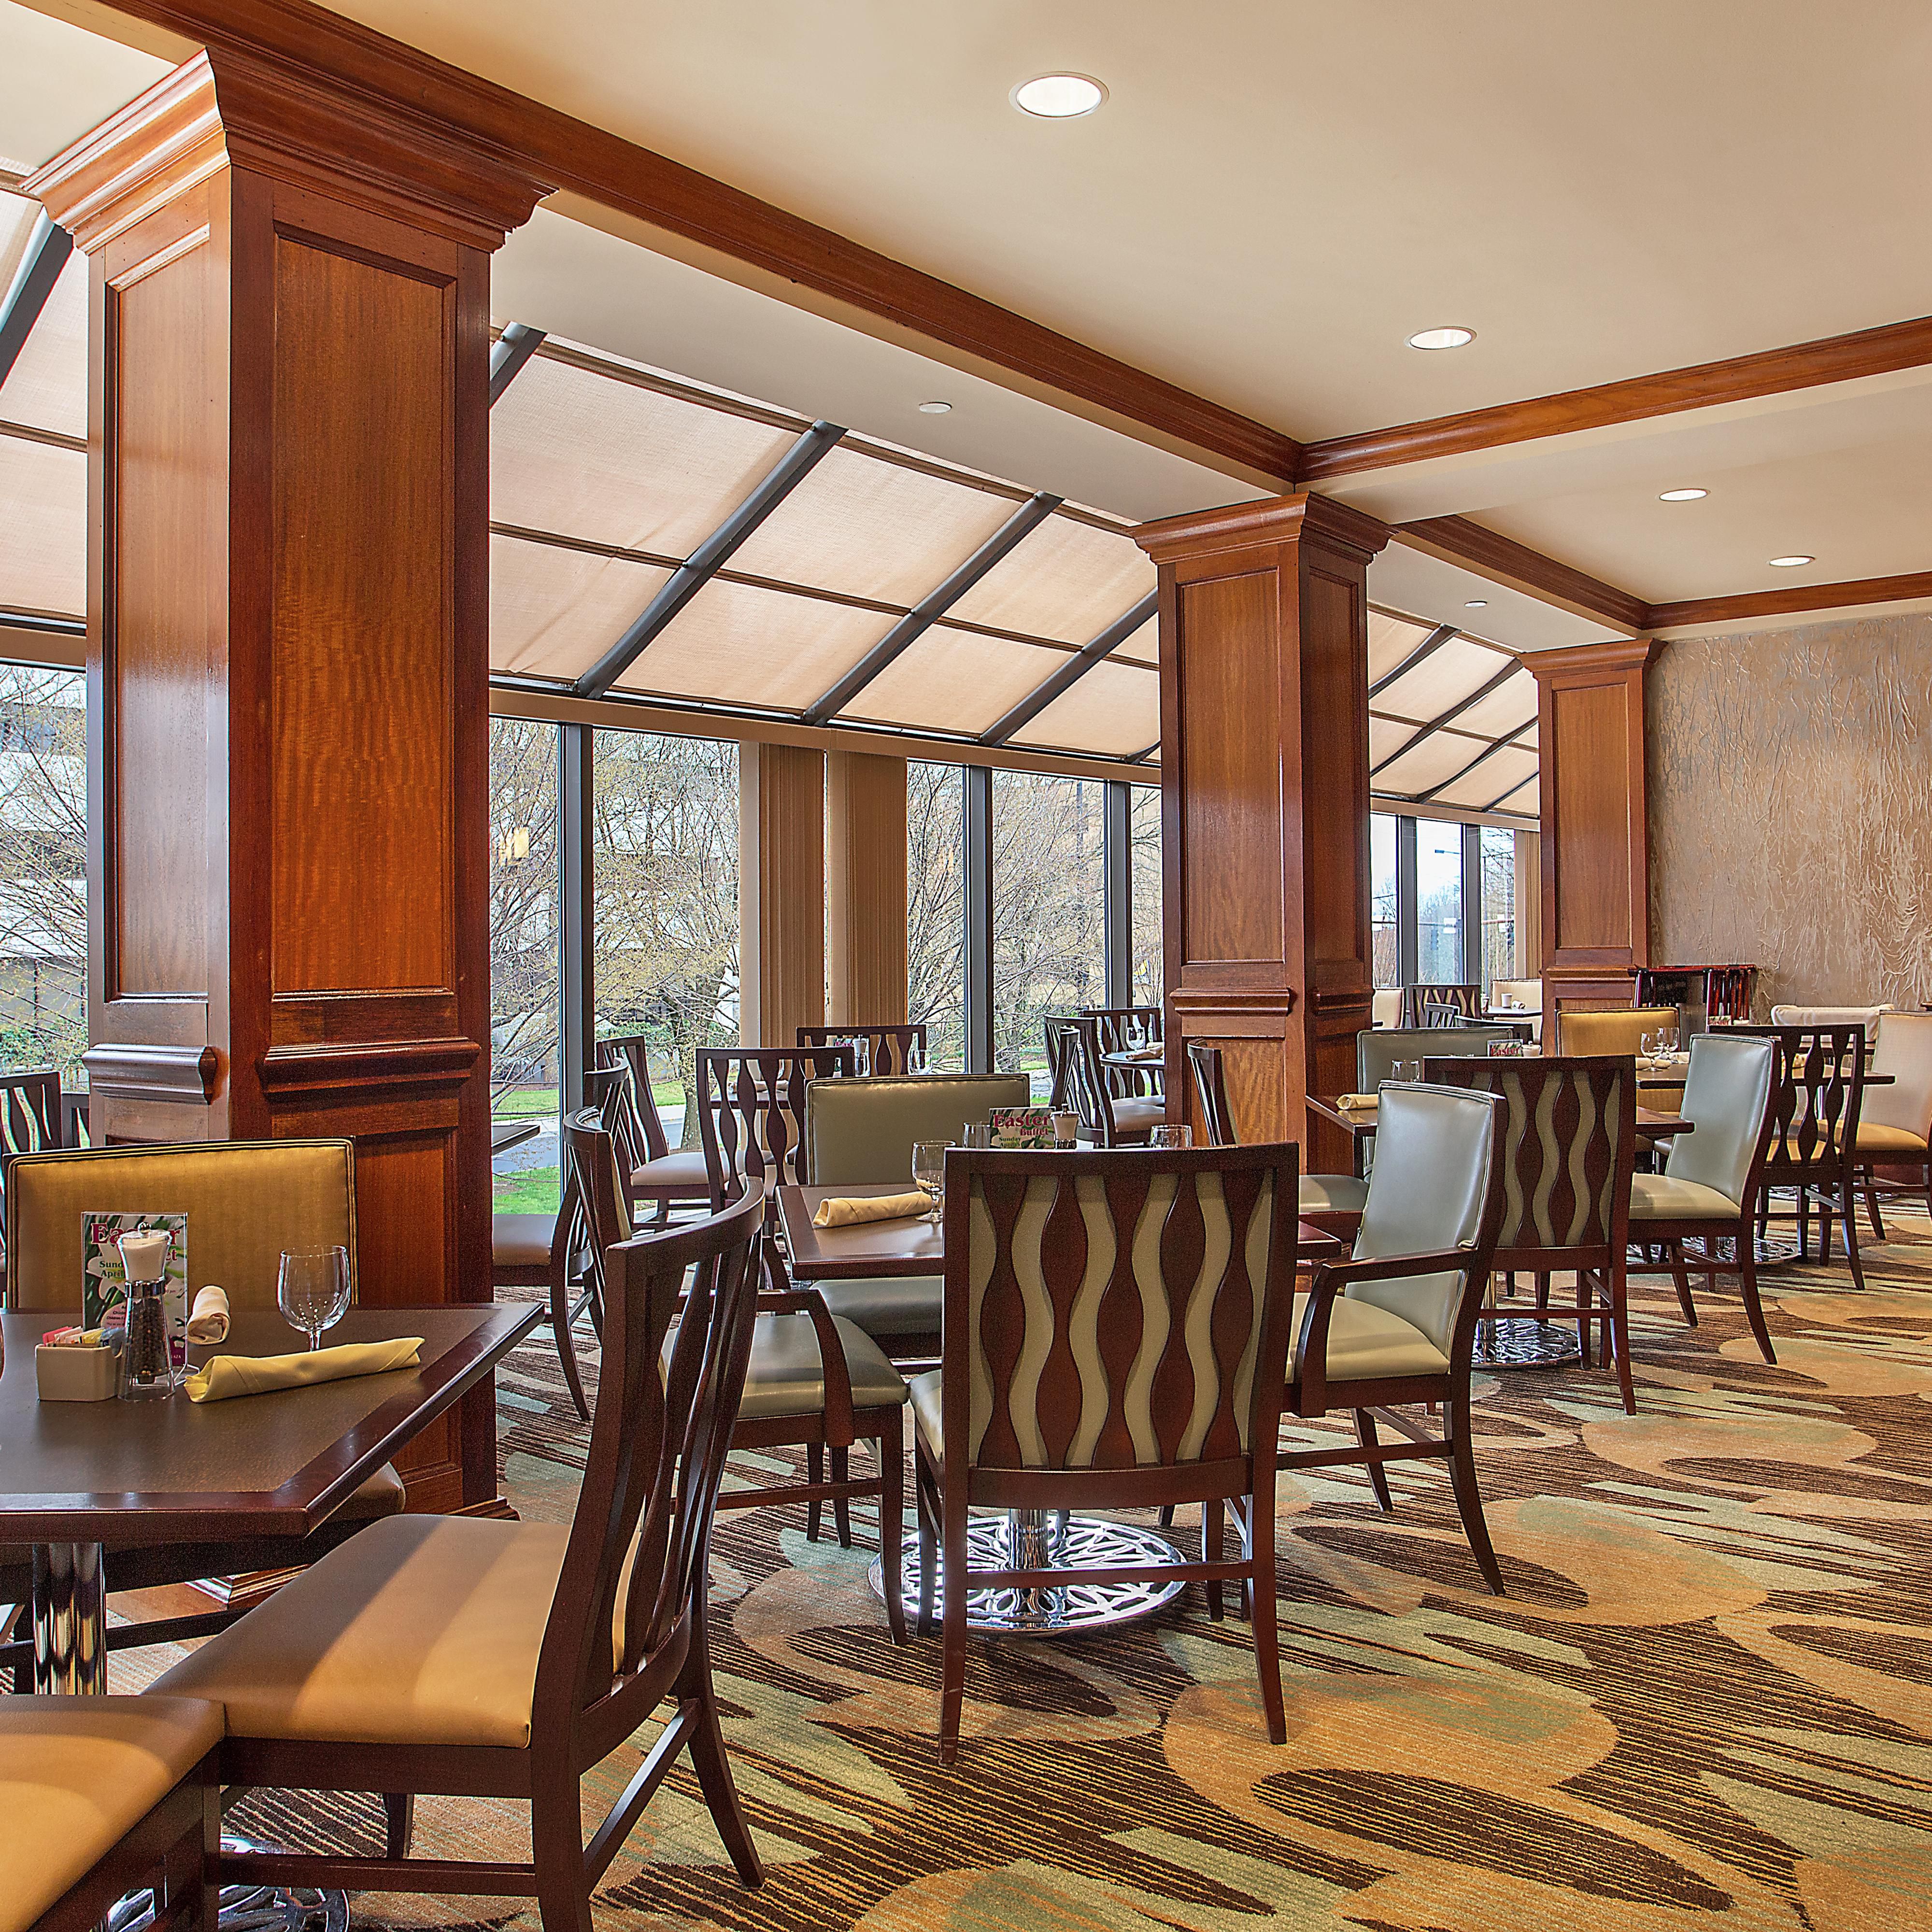 Guests can enjoy our full service on-site Restaurant.